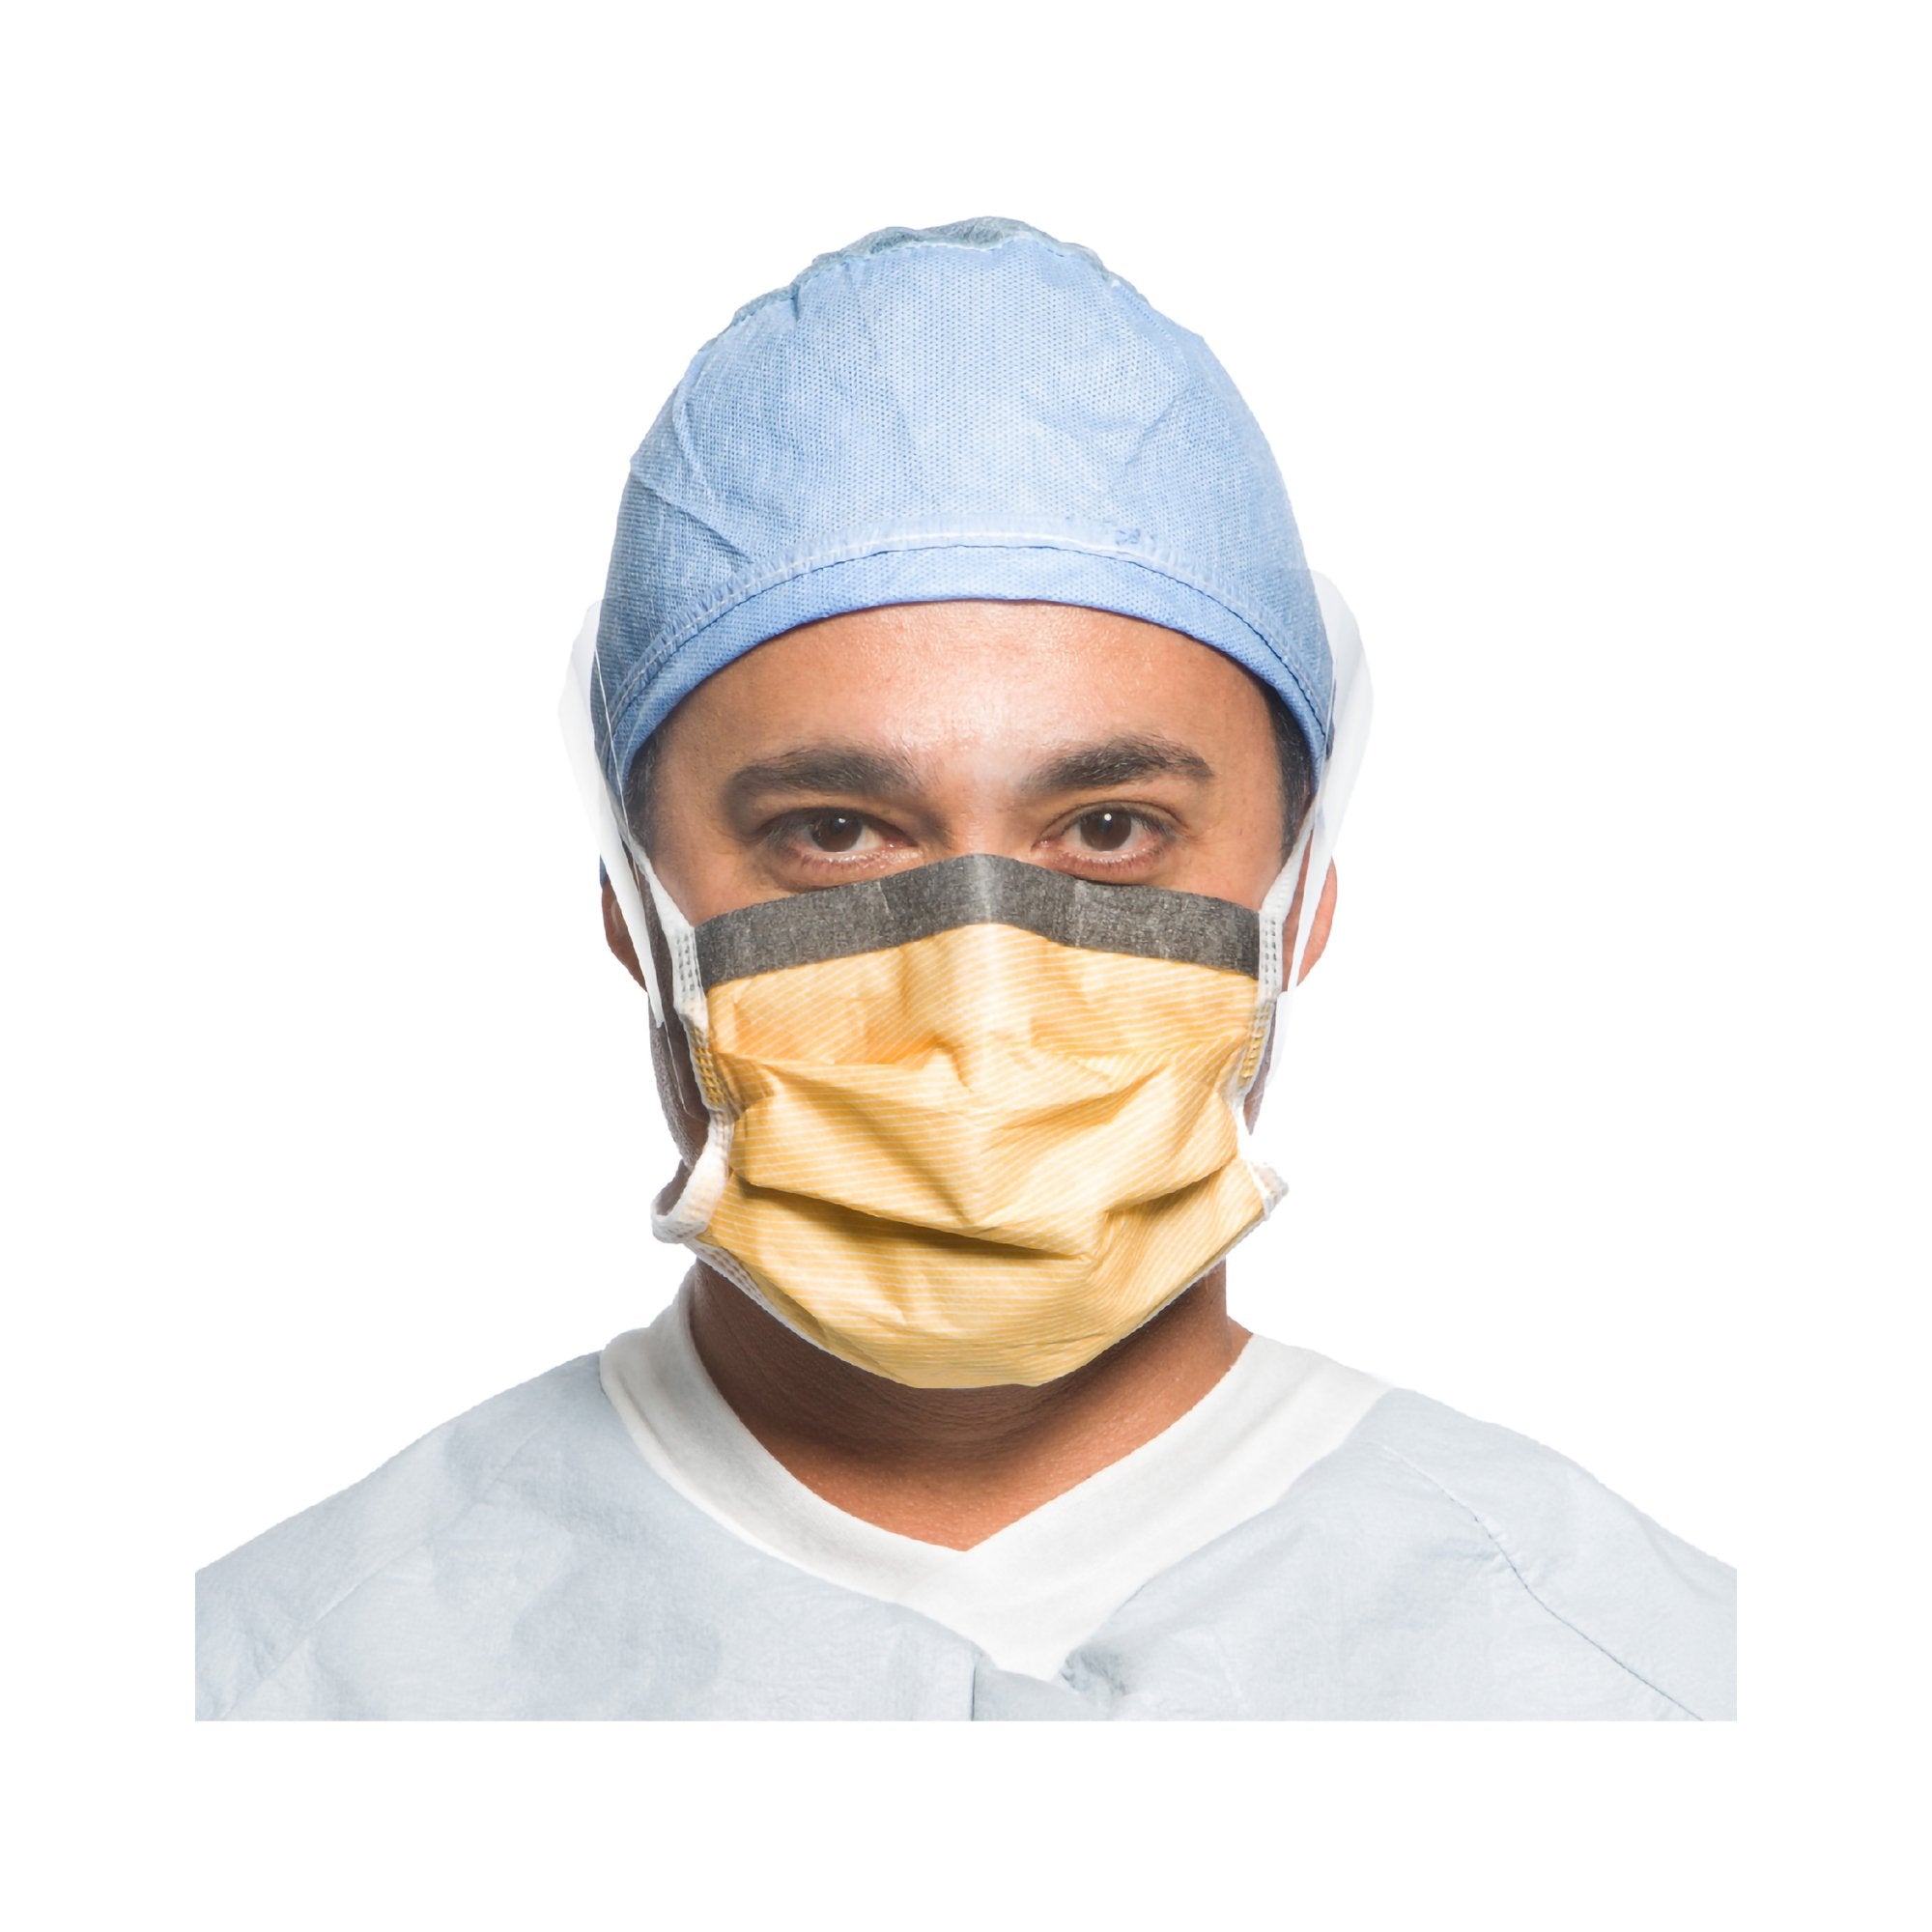 Surgical Mask with Eye Shield FluidShield Anti-fog Foam Pleated Tie Closure One Size Fits Most Orange NonSterile ASTM Level 3 Adult